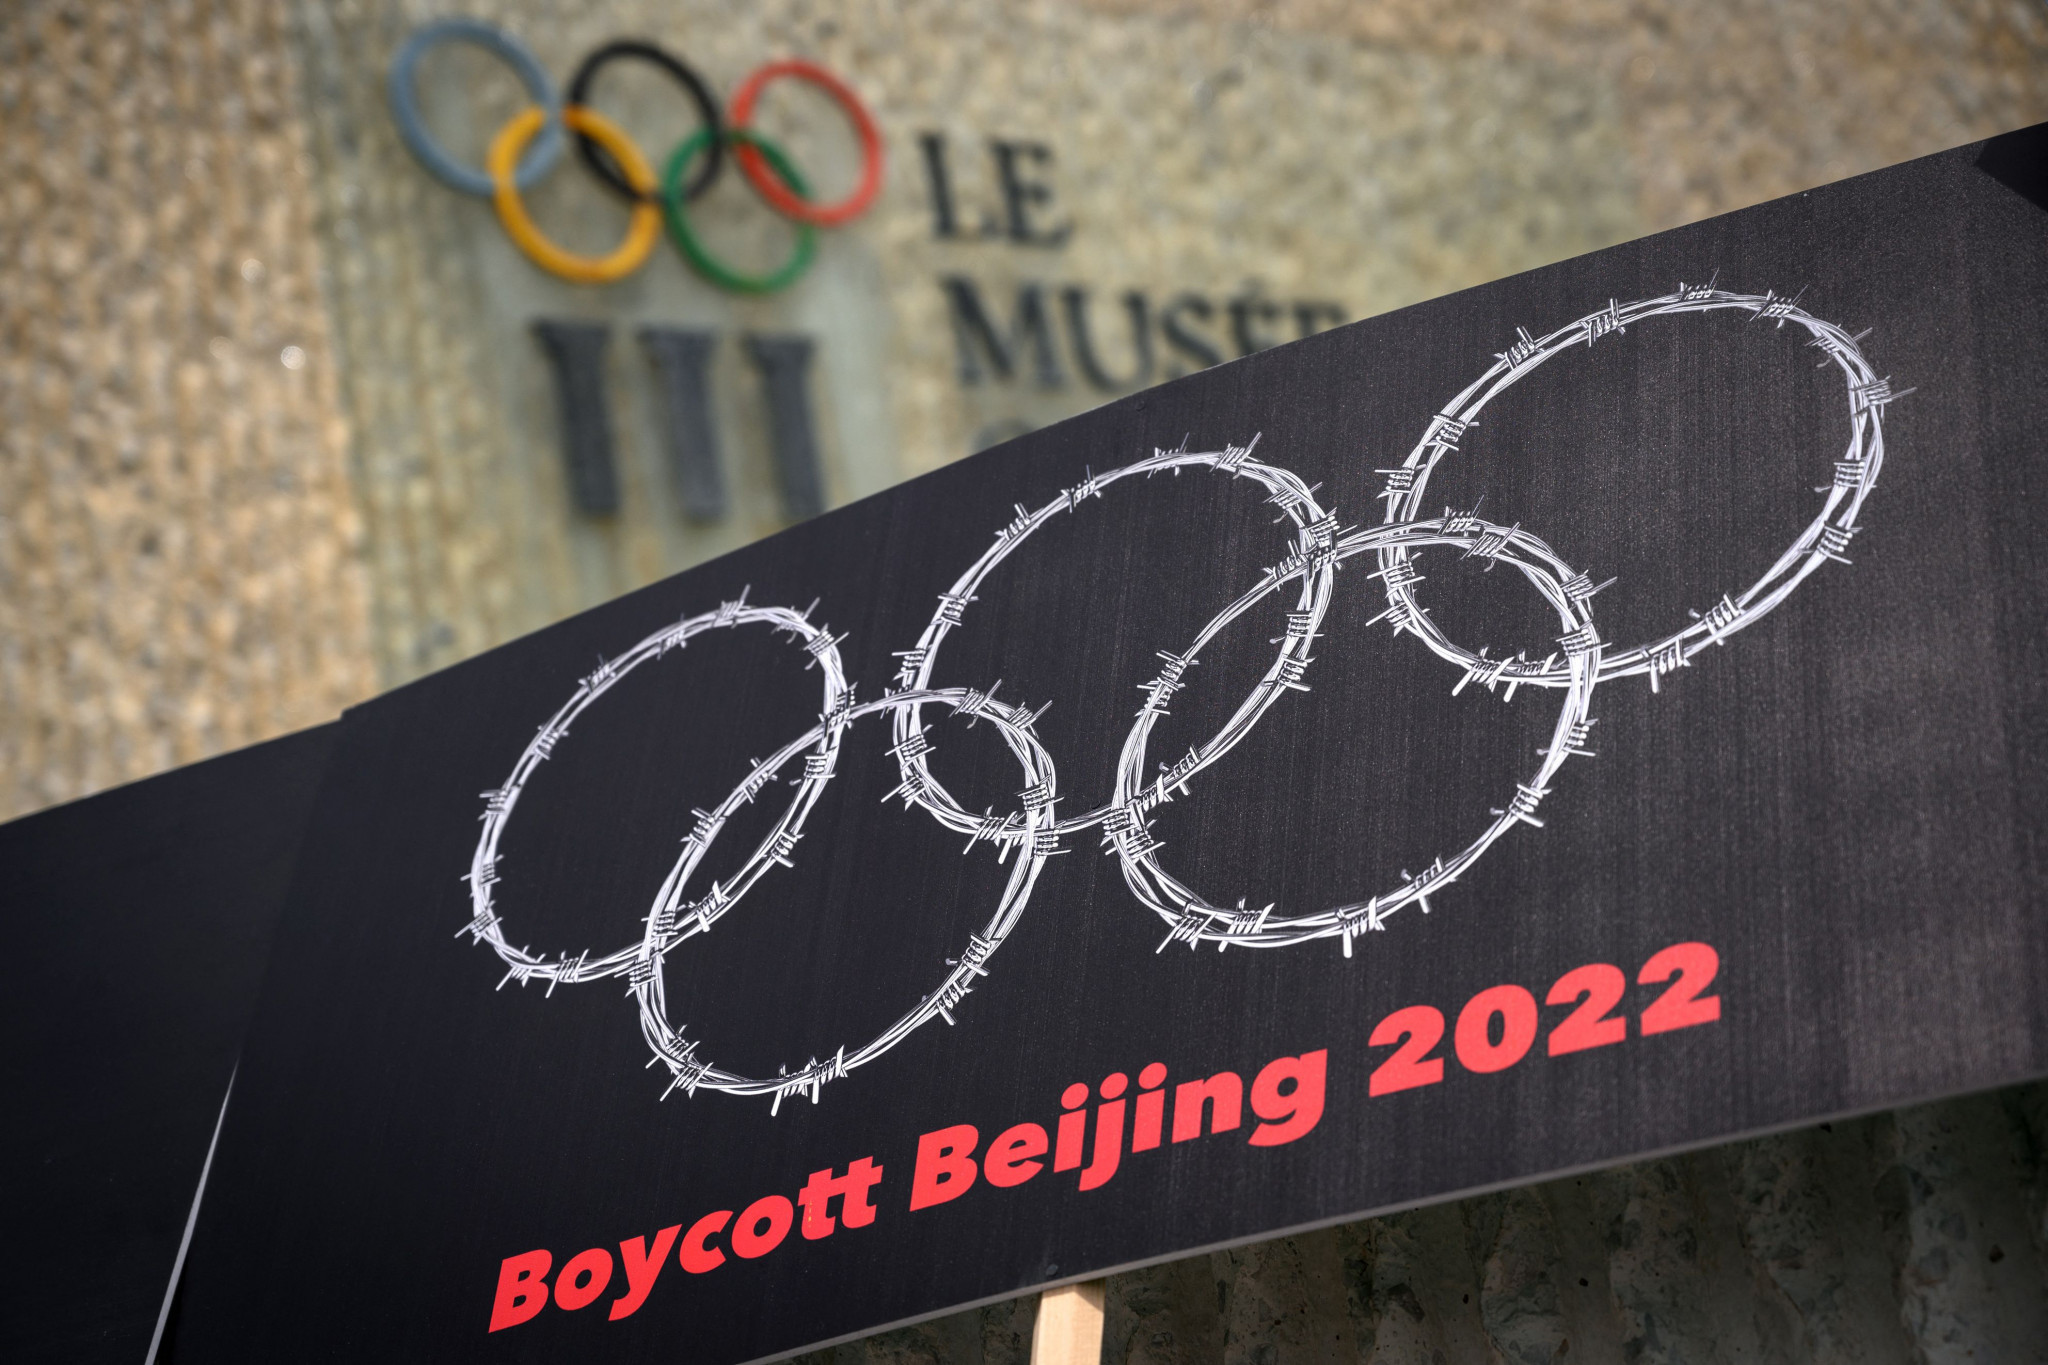 US Senators have proposed an amendment that would act as a diplomatic boycott of the Beijing 2022 Winter Olympics ©Getty Images